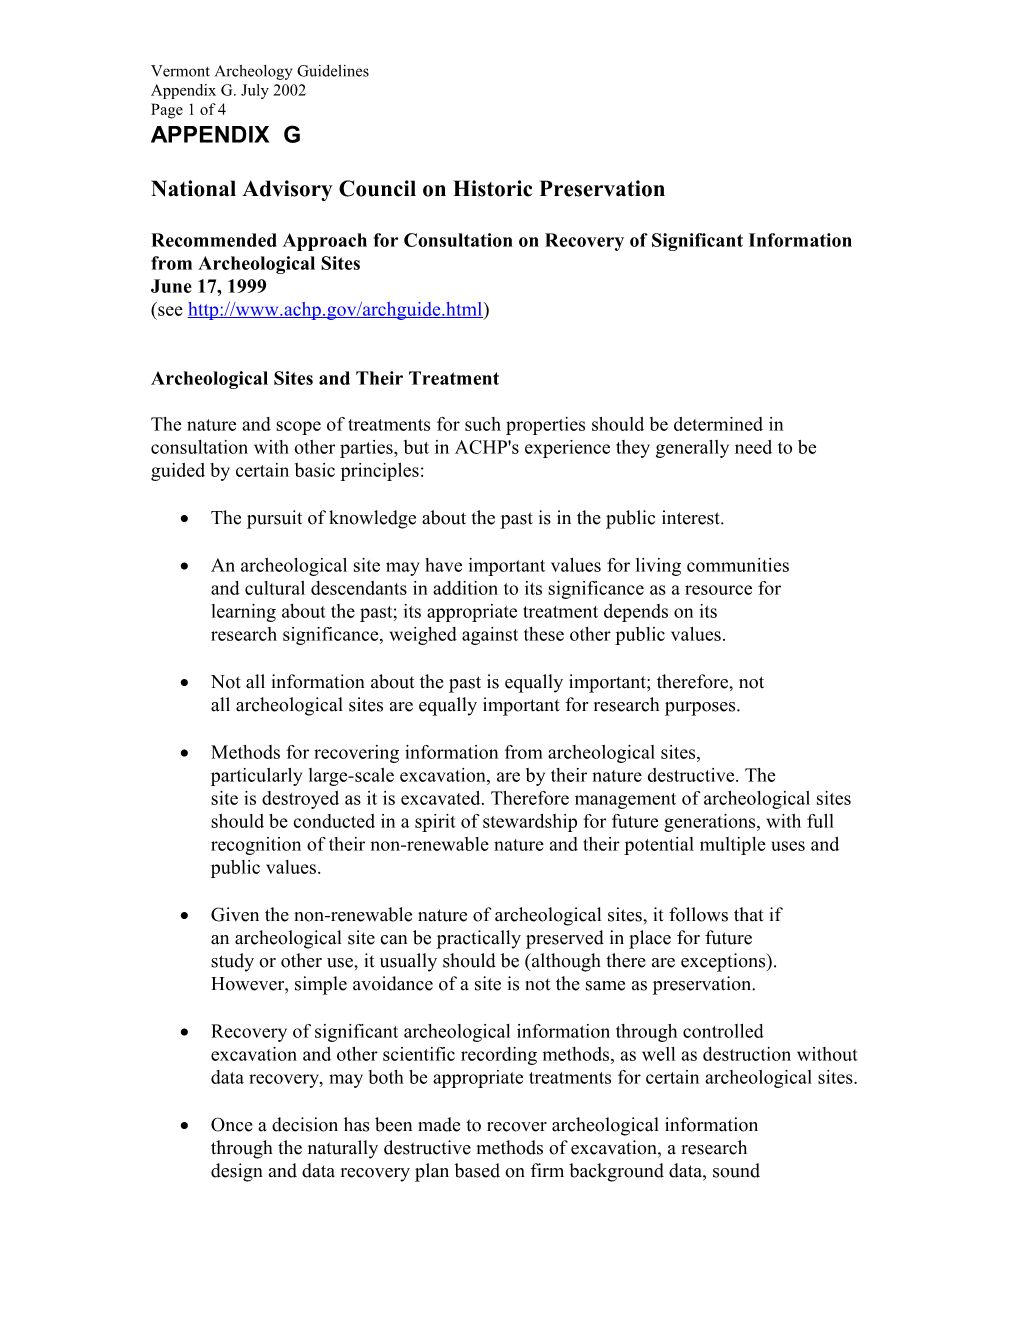 National Advisory Council on Historic Preservation